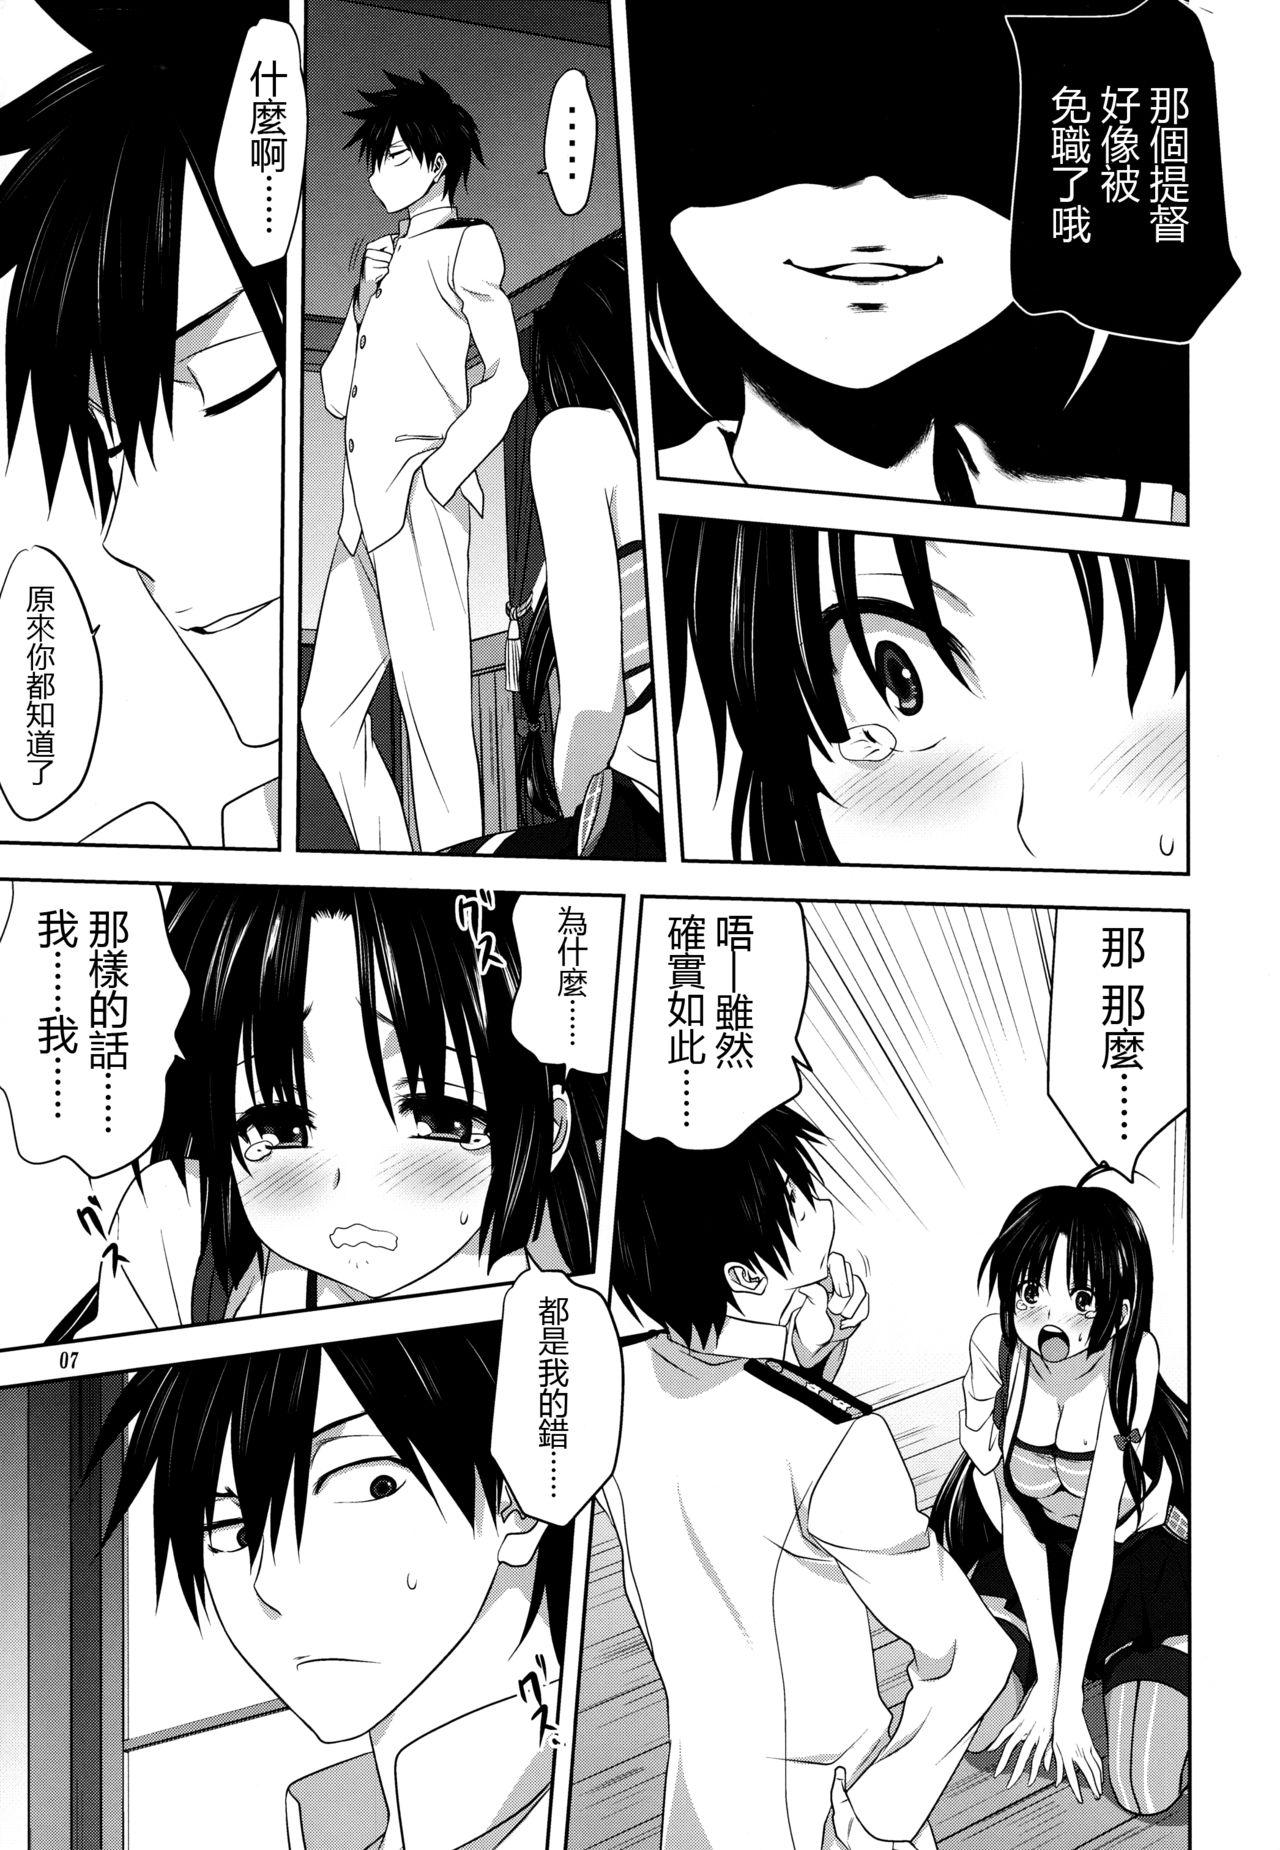 Slutty Kanmusu to Issho - Kantai collection Cowgirl - Page 6